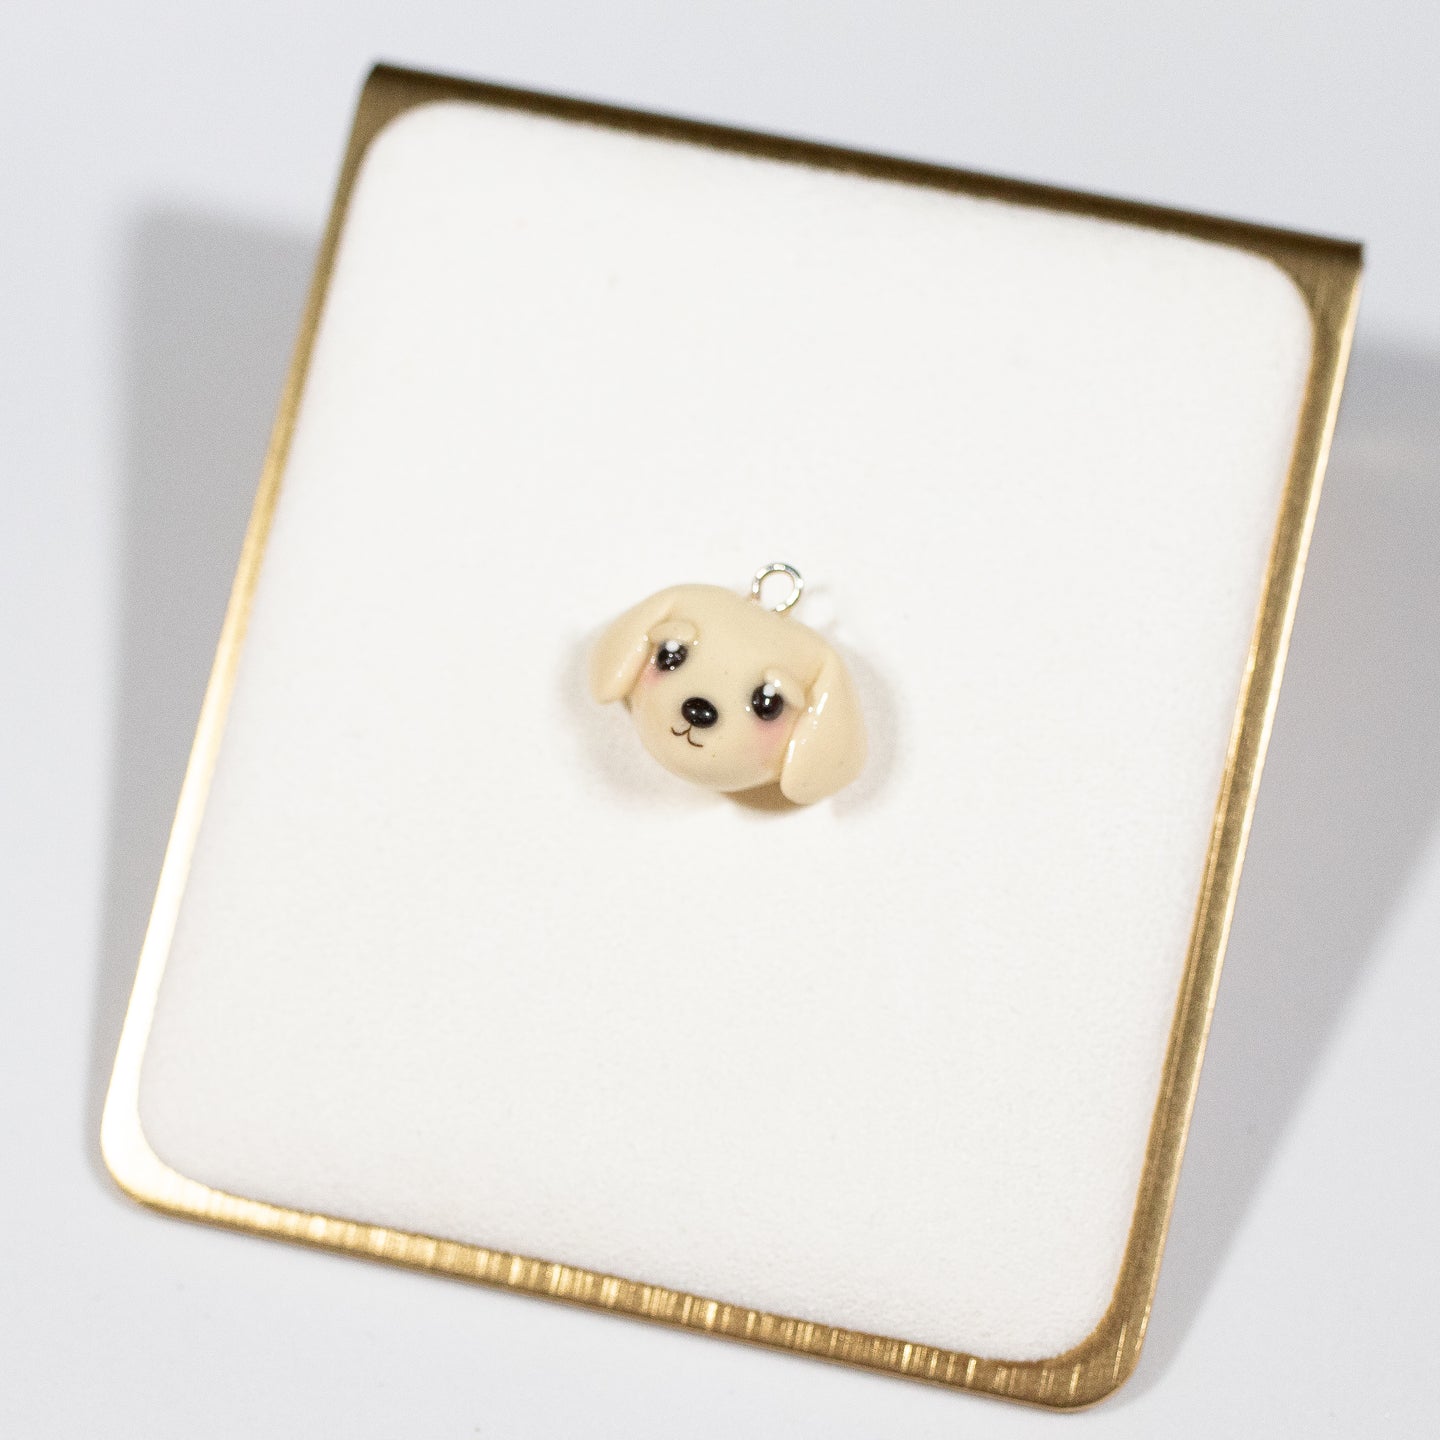 A cute, simple golden retriever dog charm! This little dog has blushing cheeks and sweet, expressive eyebrows. Golden retriever dogs are well known for their gentleness and affectionate nature.